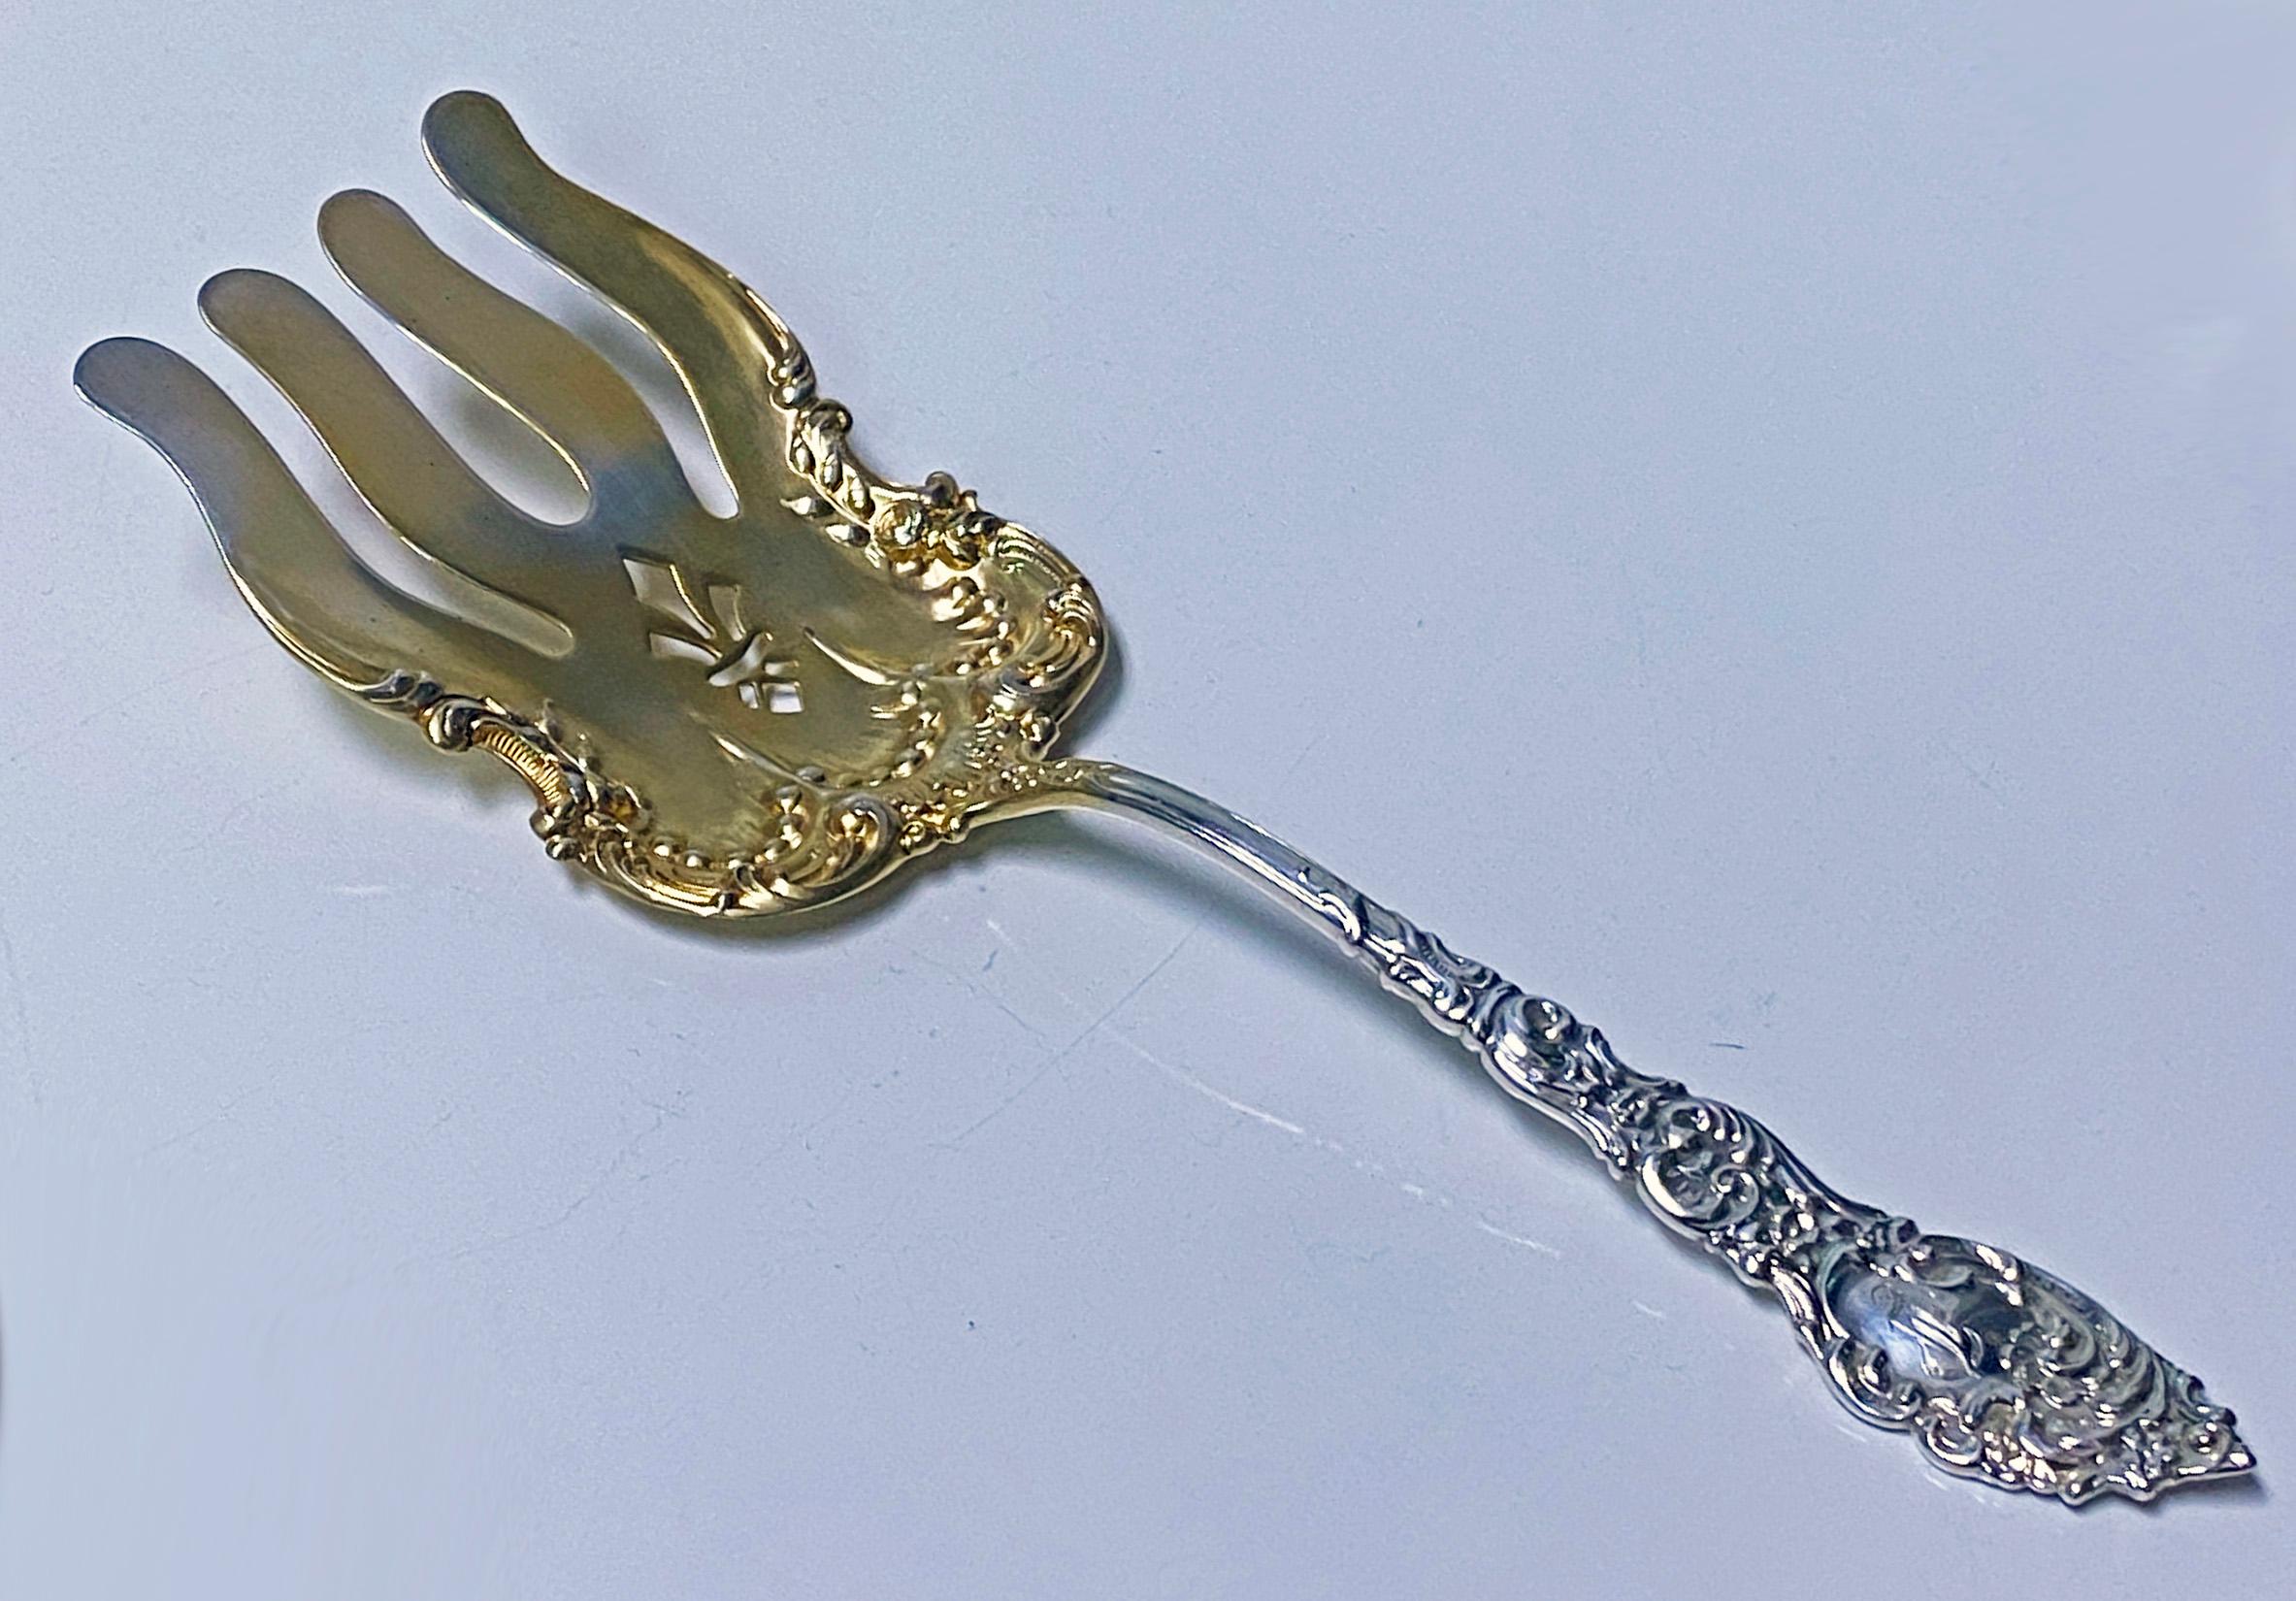 Passaic by Unger sterling silver asparagus fork gold washed circa 1900. Good large Serving Fork, partial gold wash. Length: 8.75 inches. Weight: 81 grams. Very minor wear to original gold wash on tines totally commensurate with age, mentioned purely